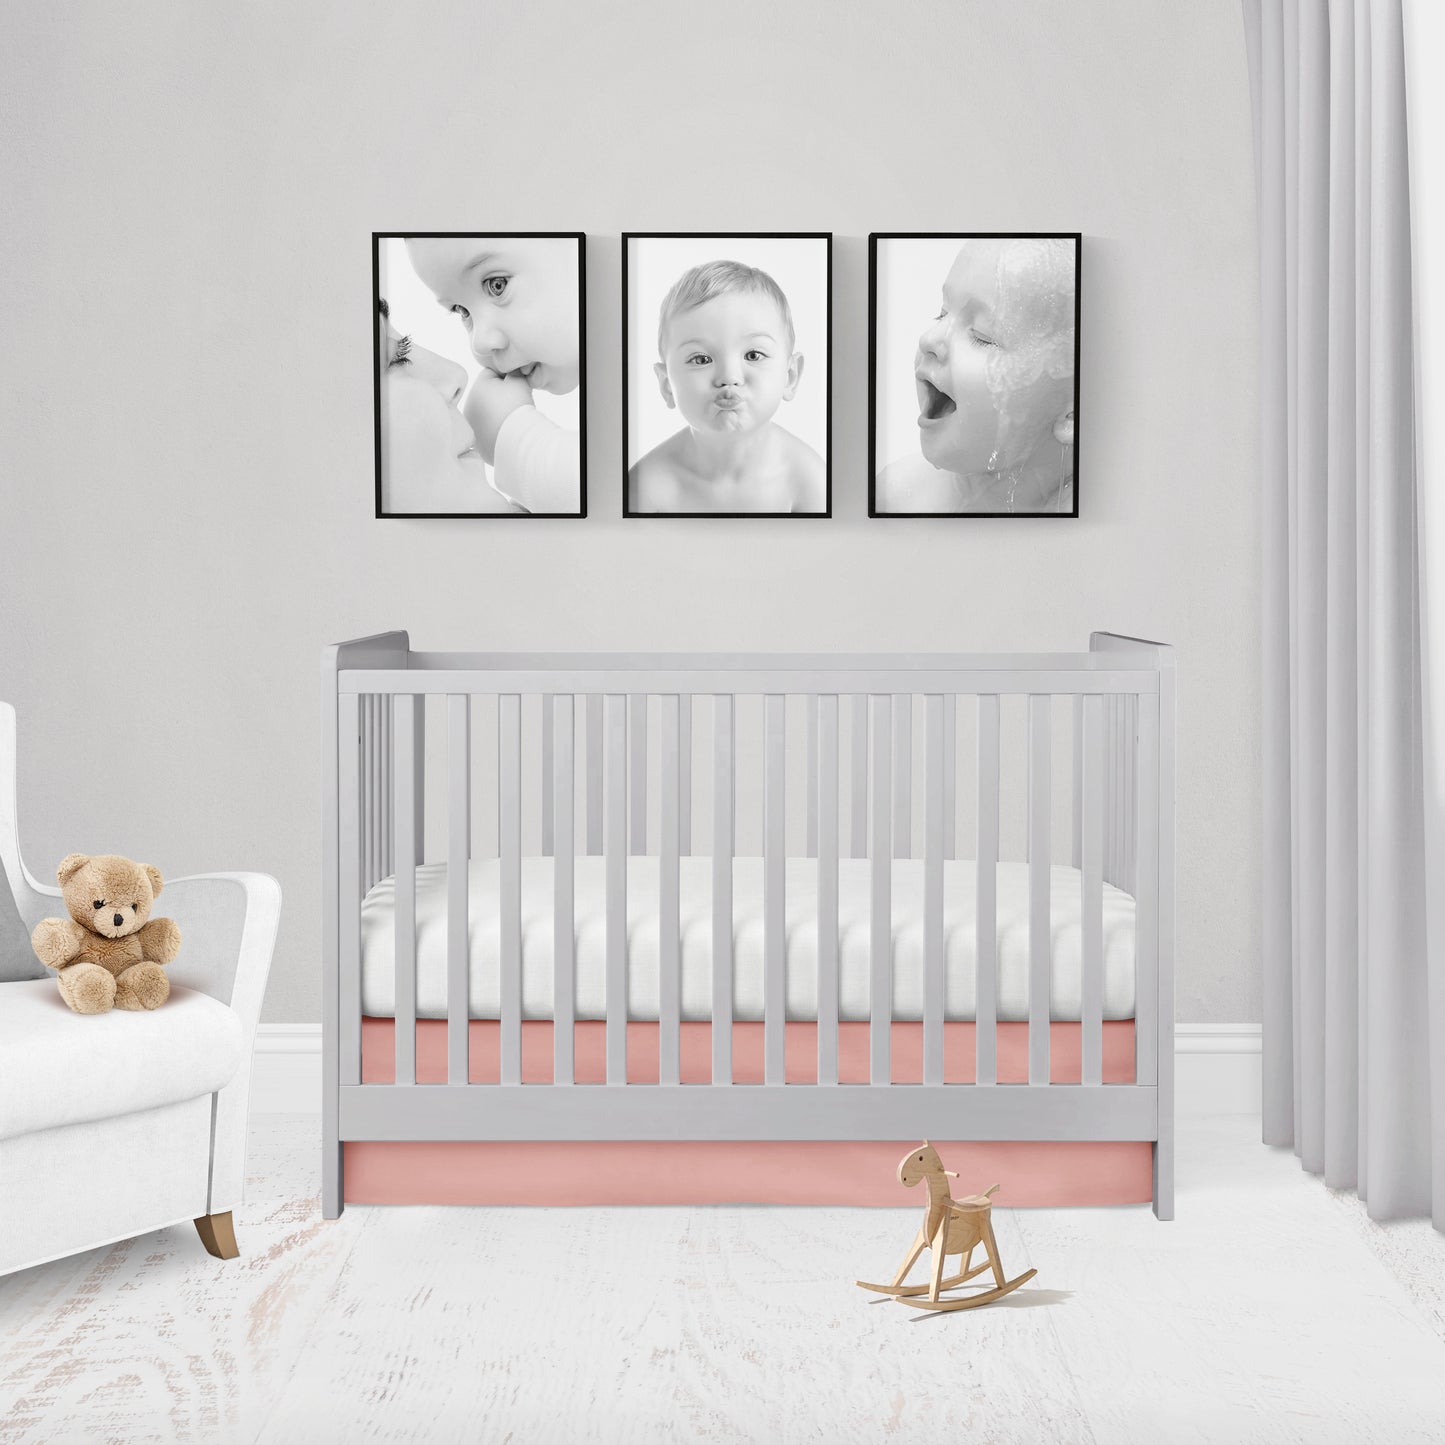 coral crib skirt shown in the flat or straight option 